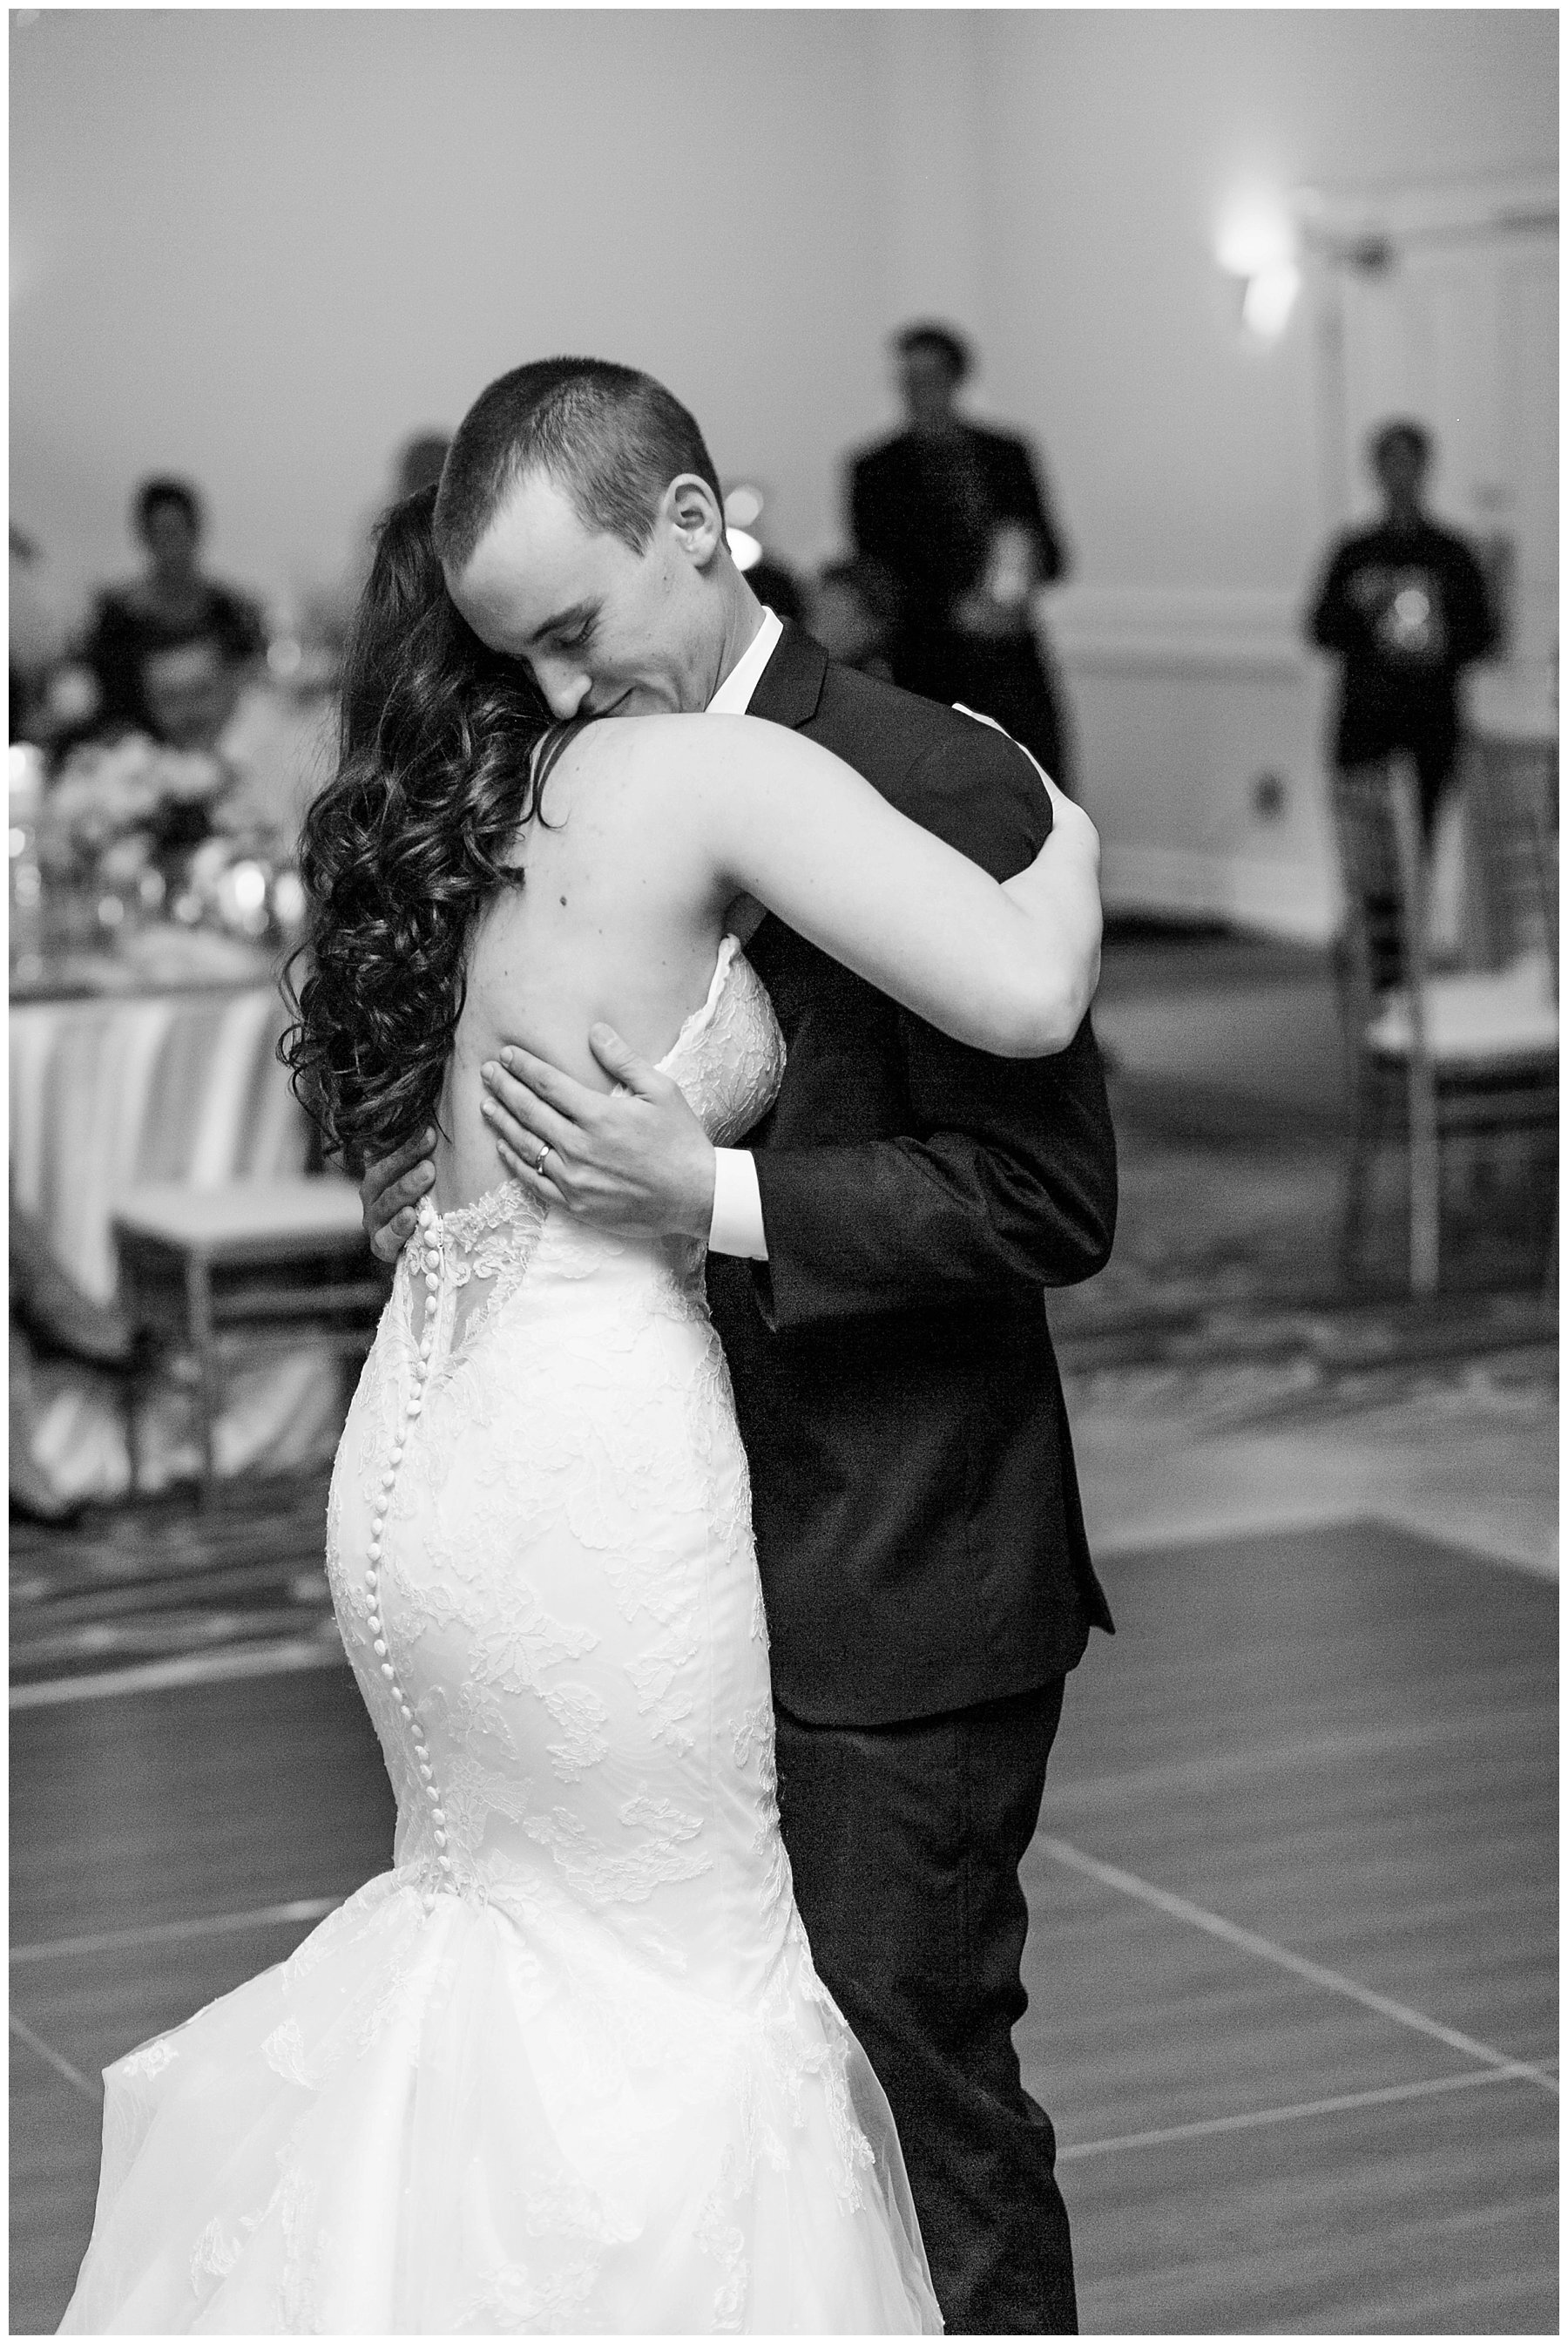  black and white photo of bride and groom dancing and embraced 